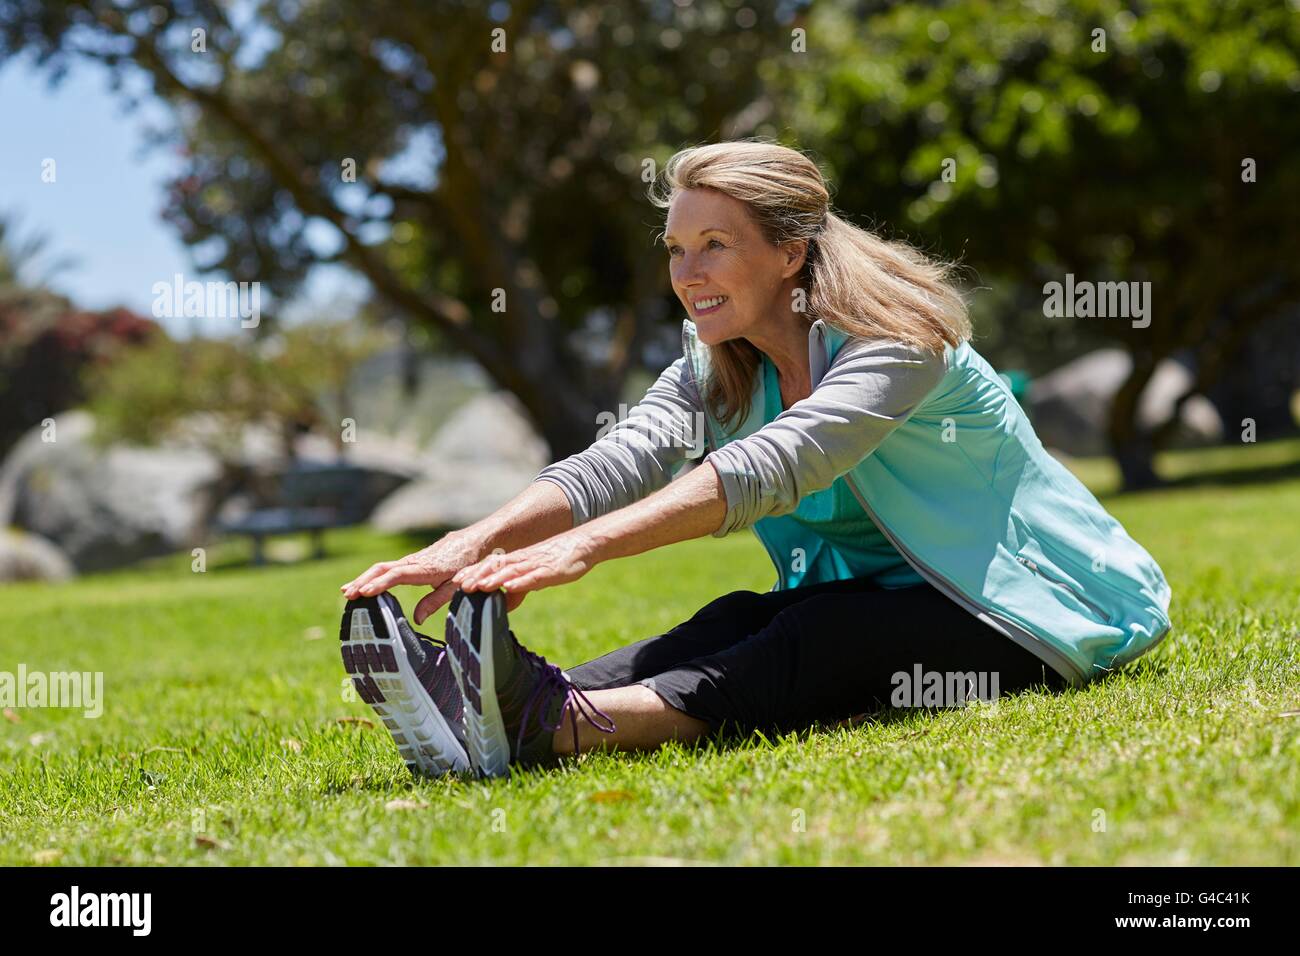 MODEL RELEASED. Senior woman stretching on grass. Stock Photo